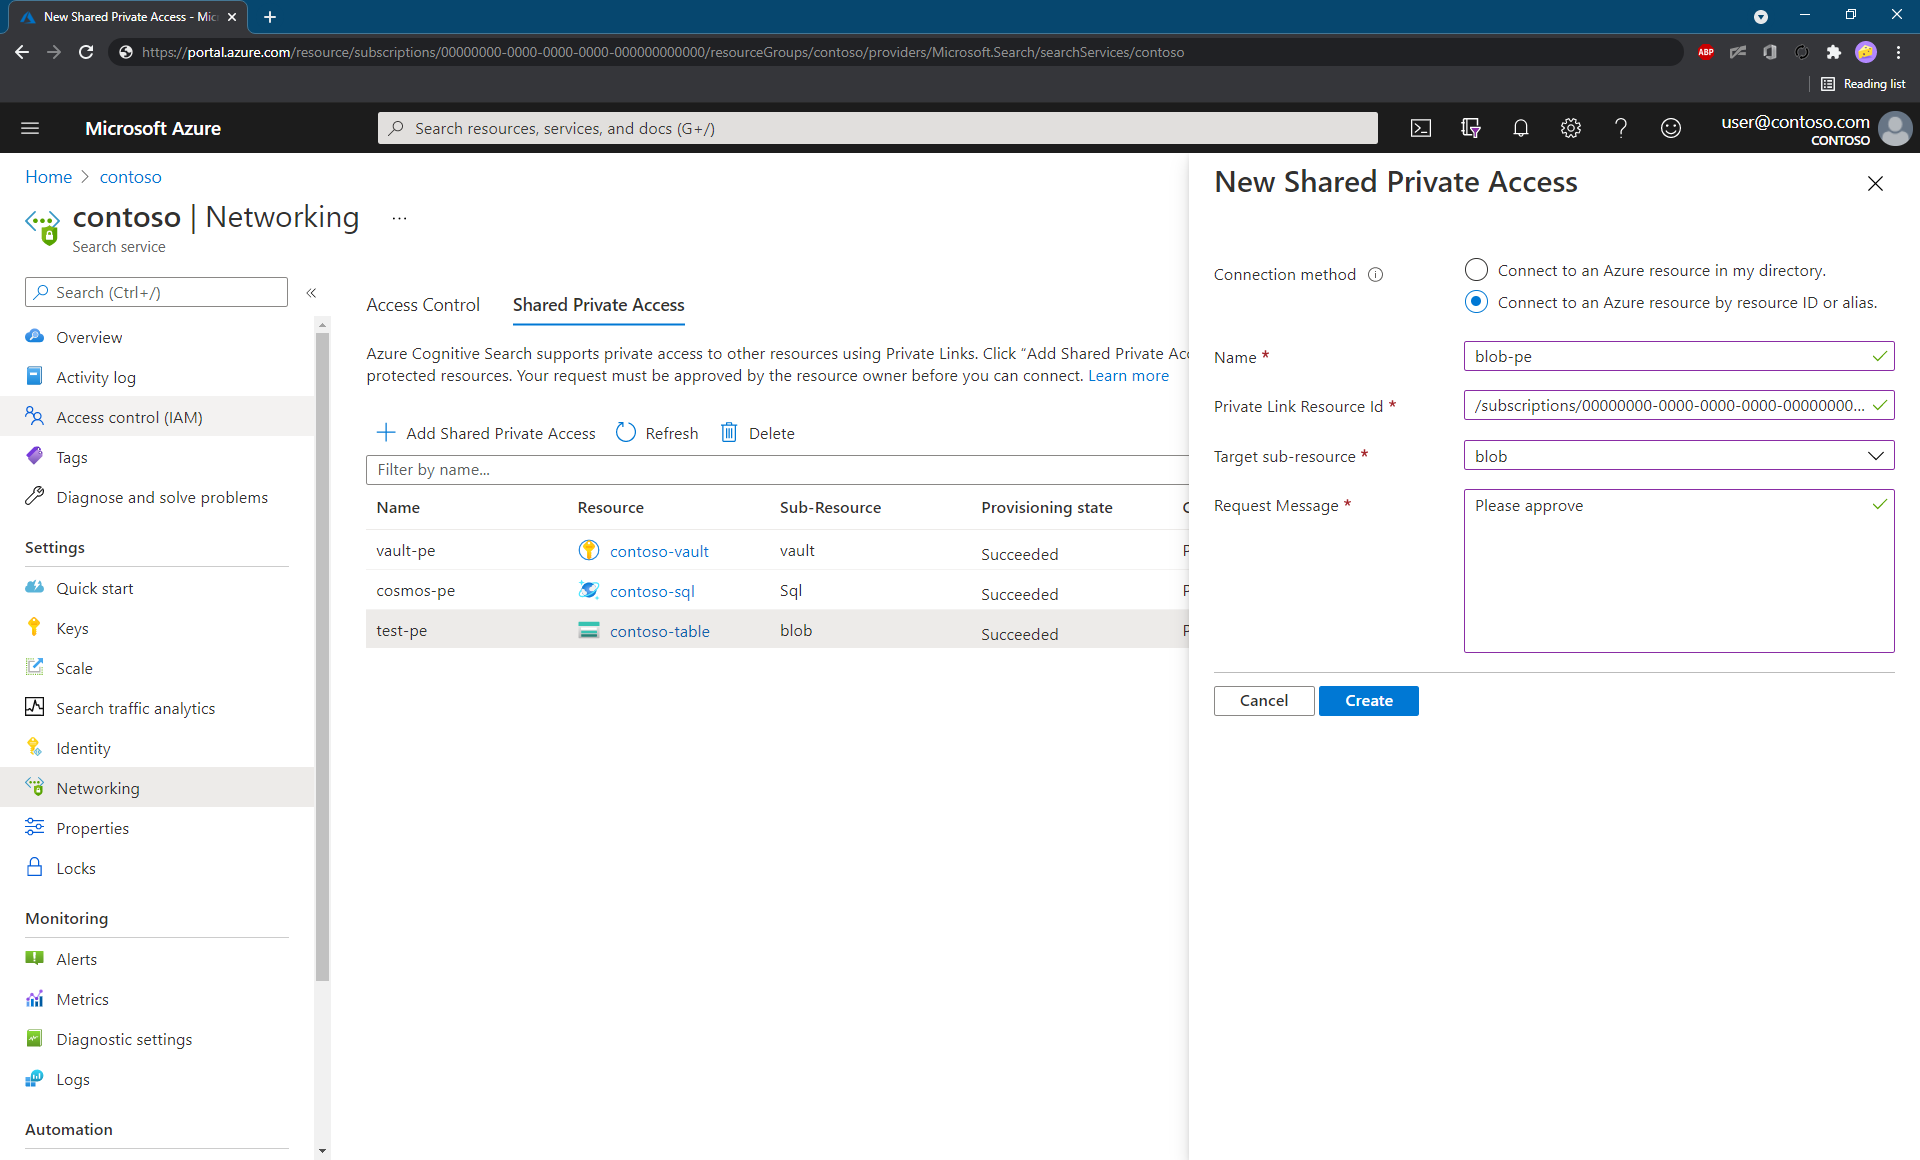 Screenshot of the Add Shared Private Access page, showing the manual experience for creating a shared private link resource.